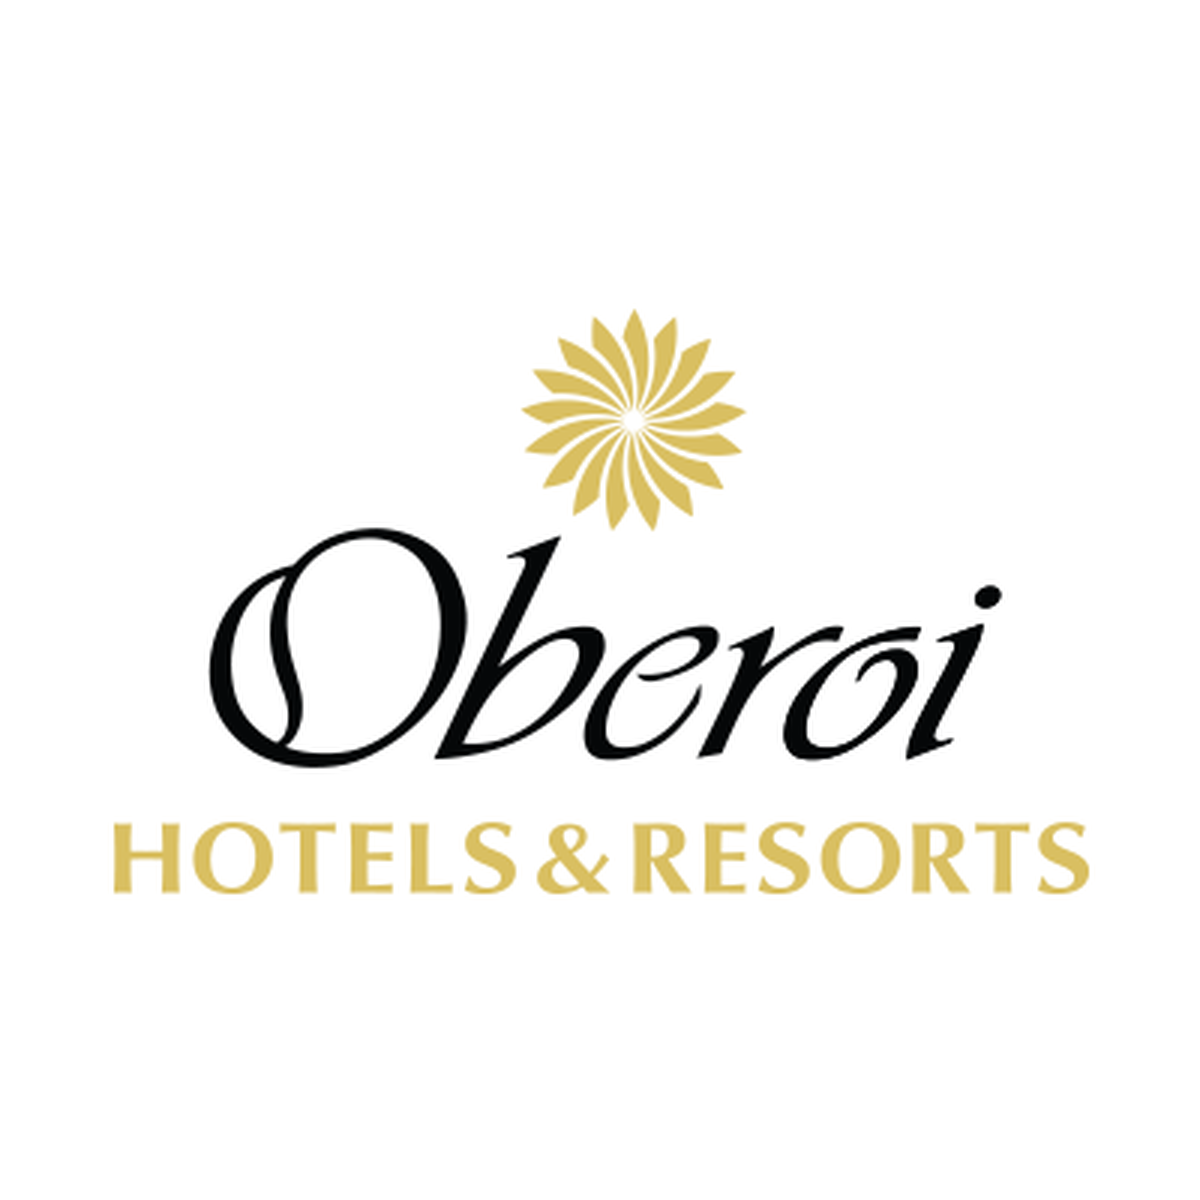 Oberoi Hotels coupon codes, promo codes and deals